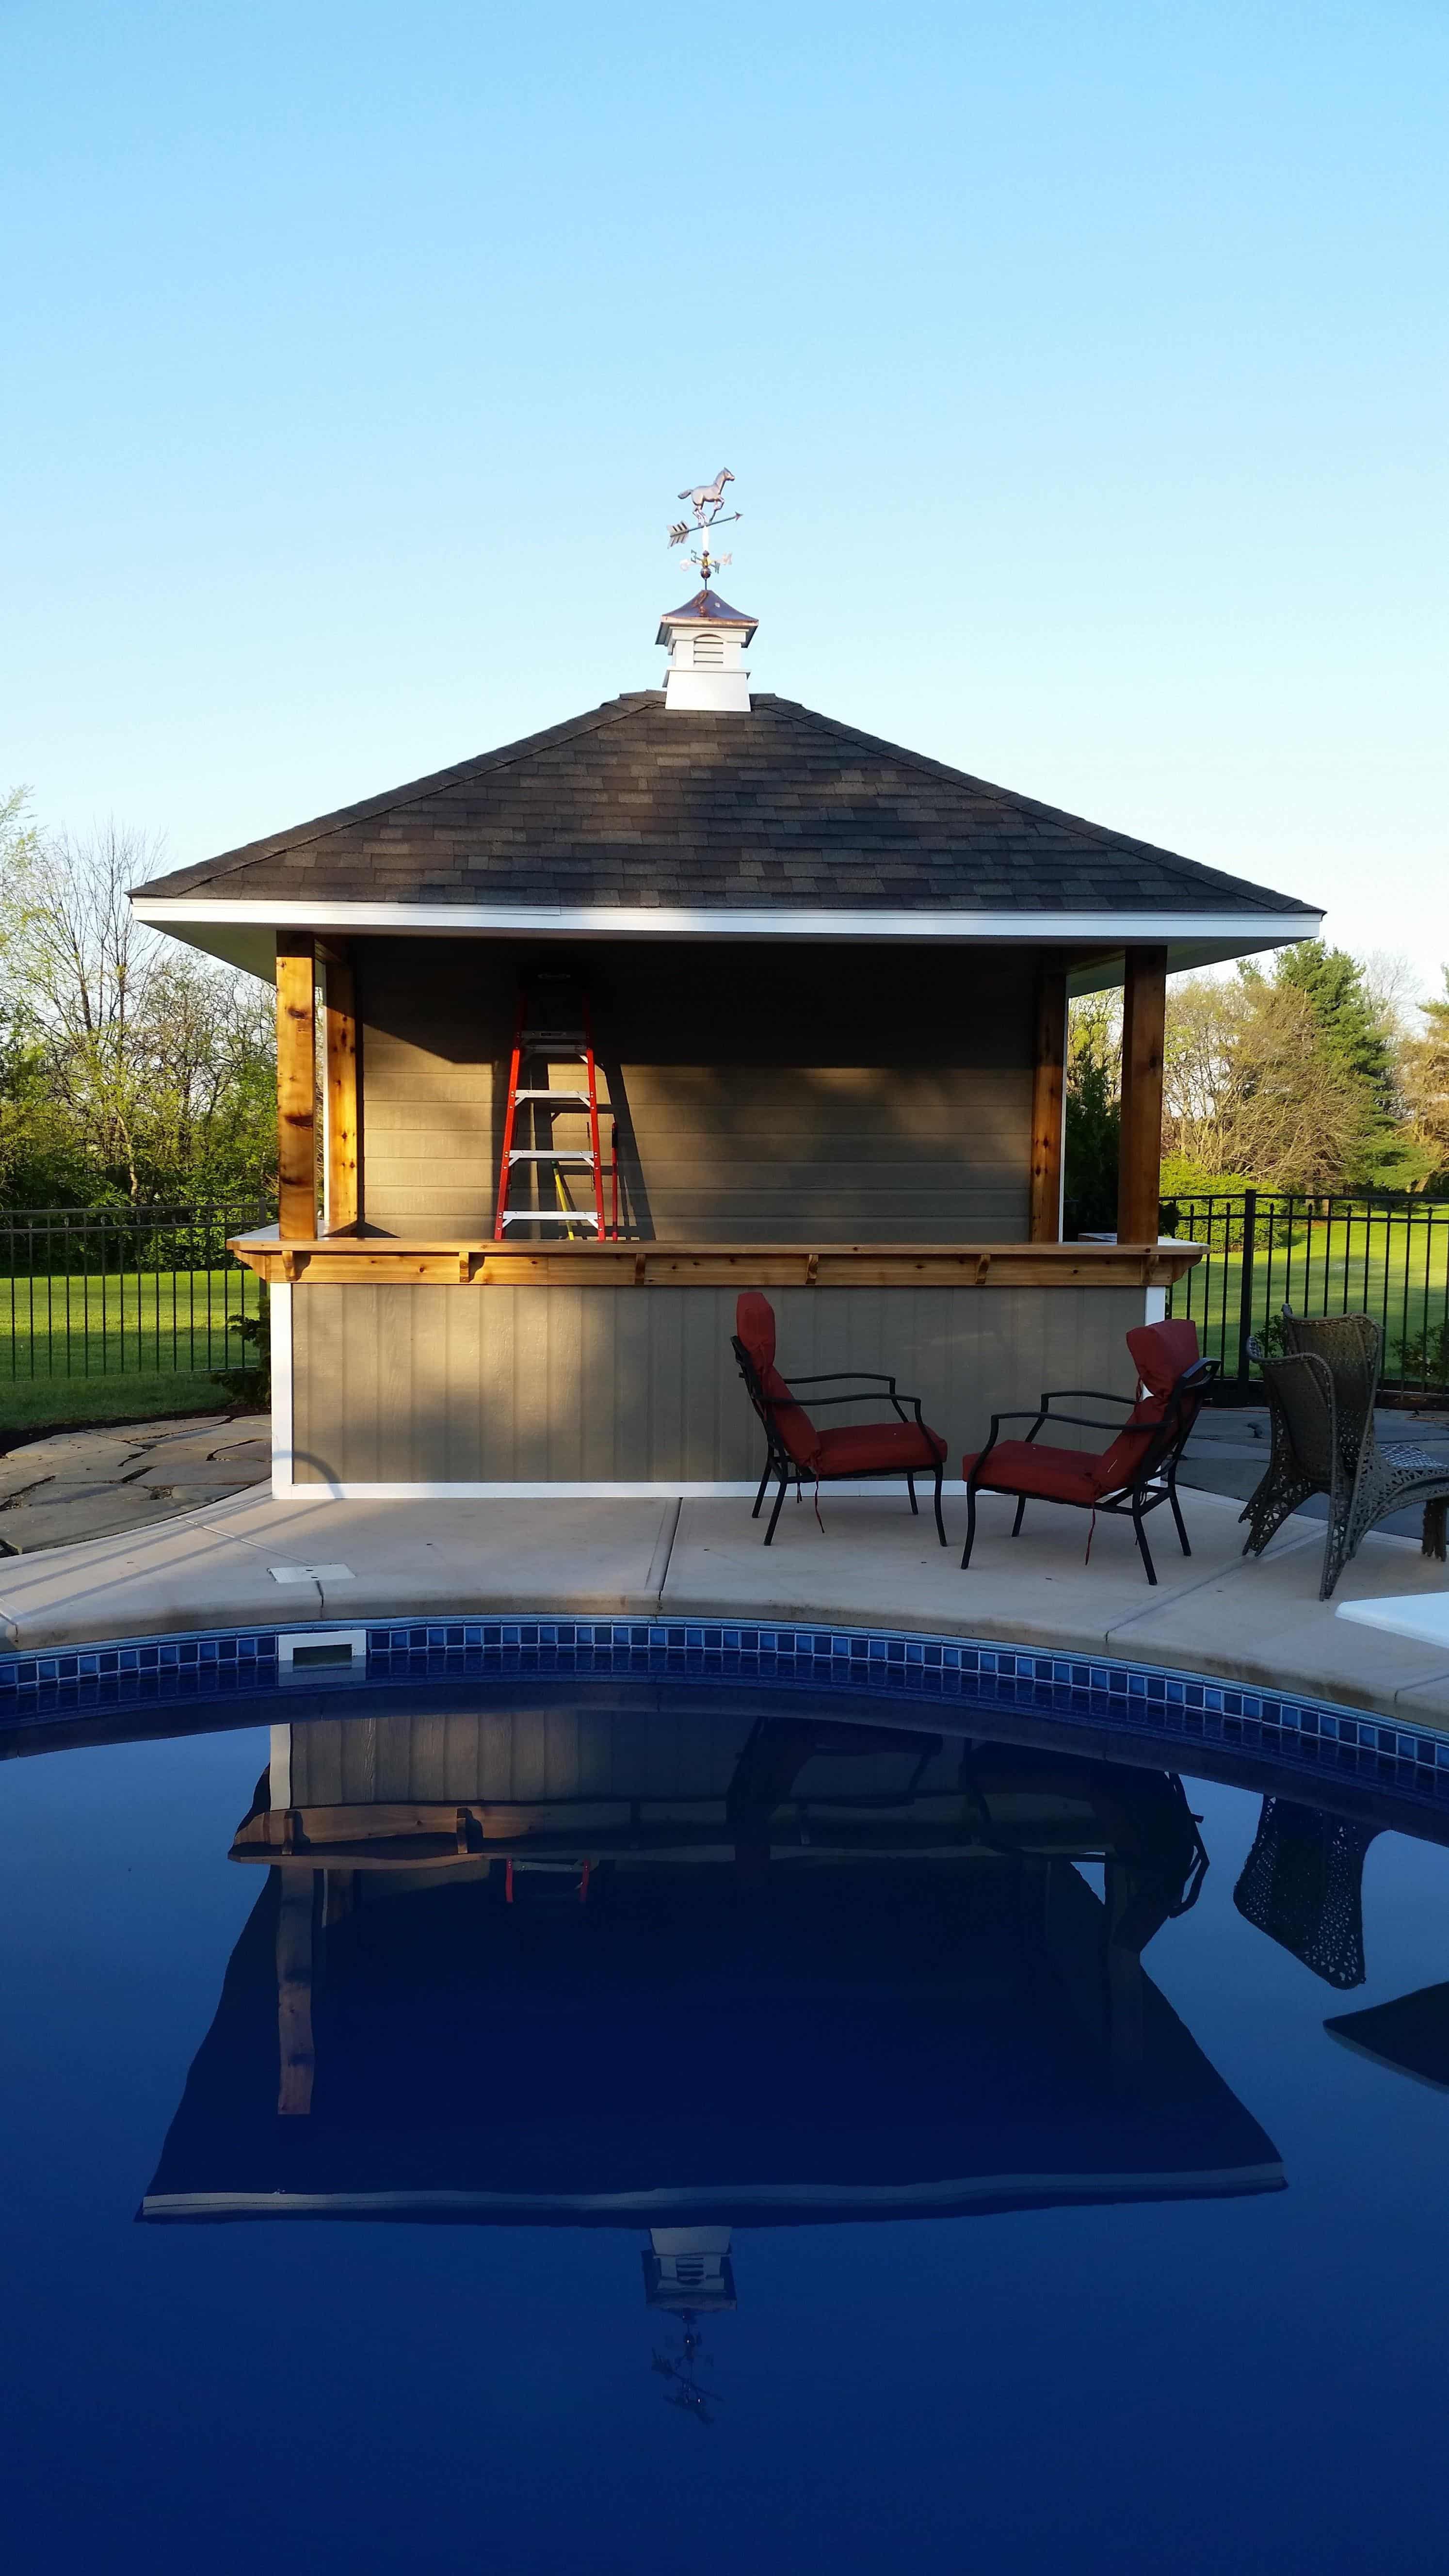 Barside pool cabana 10x12 with Vinyl curved cupola in Lebanon Ohio. ID number 194252-2.